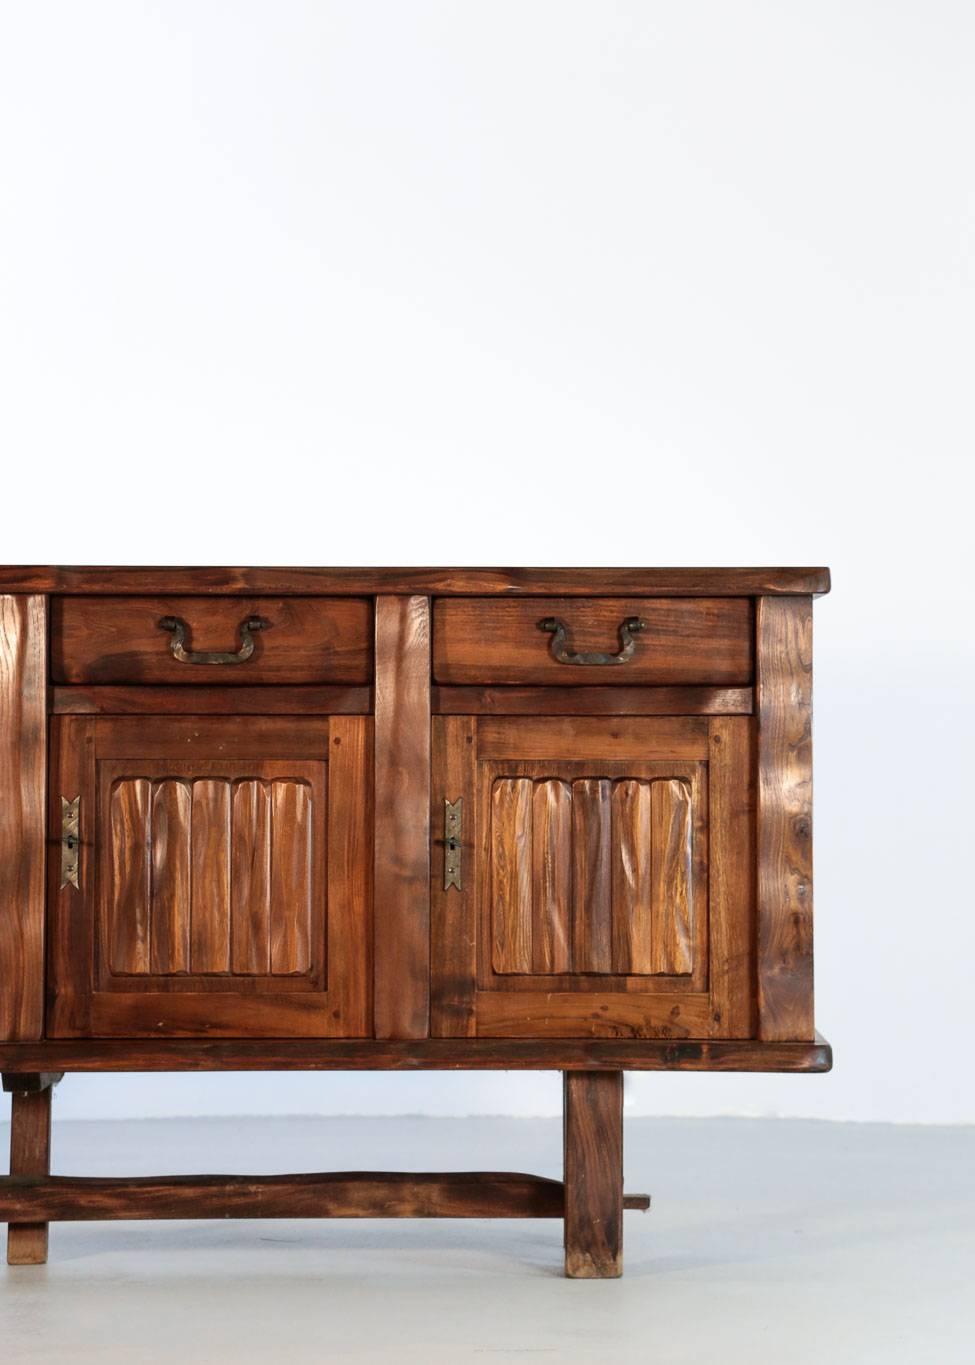 Solid elm sideboard designed by Olavi Hanninen. 
Composed of four doors and three drawers. Handles in black metal.
Excellent condition.